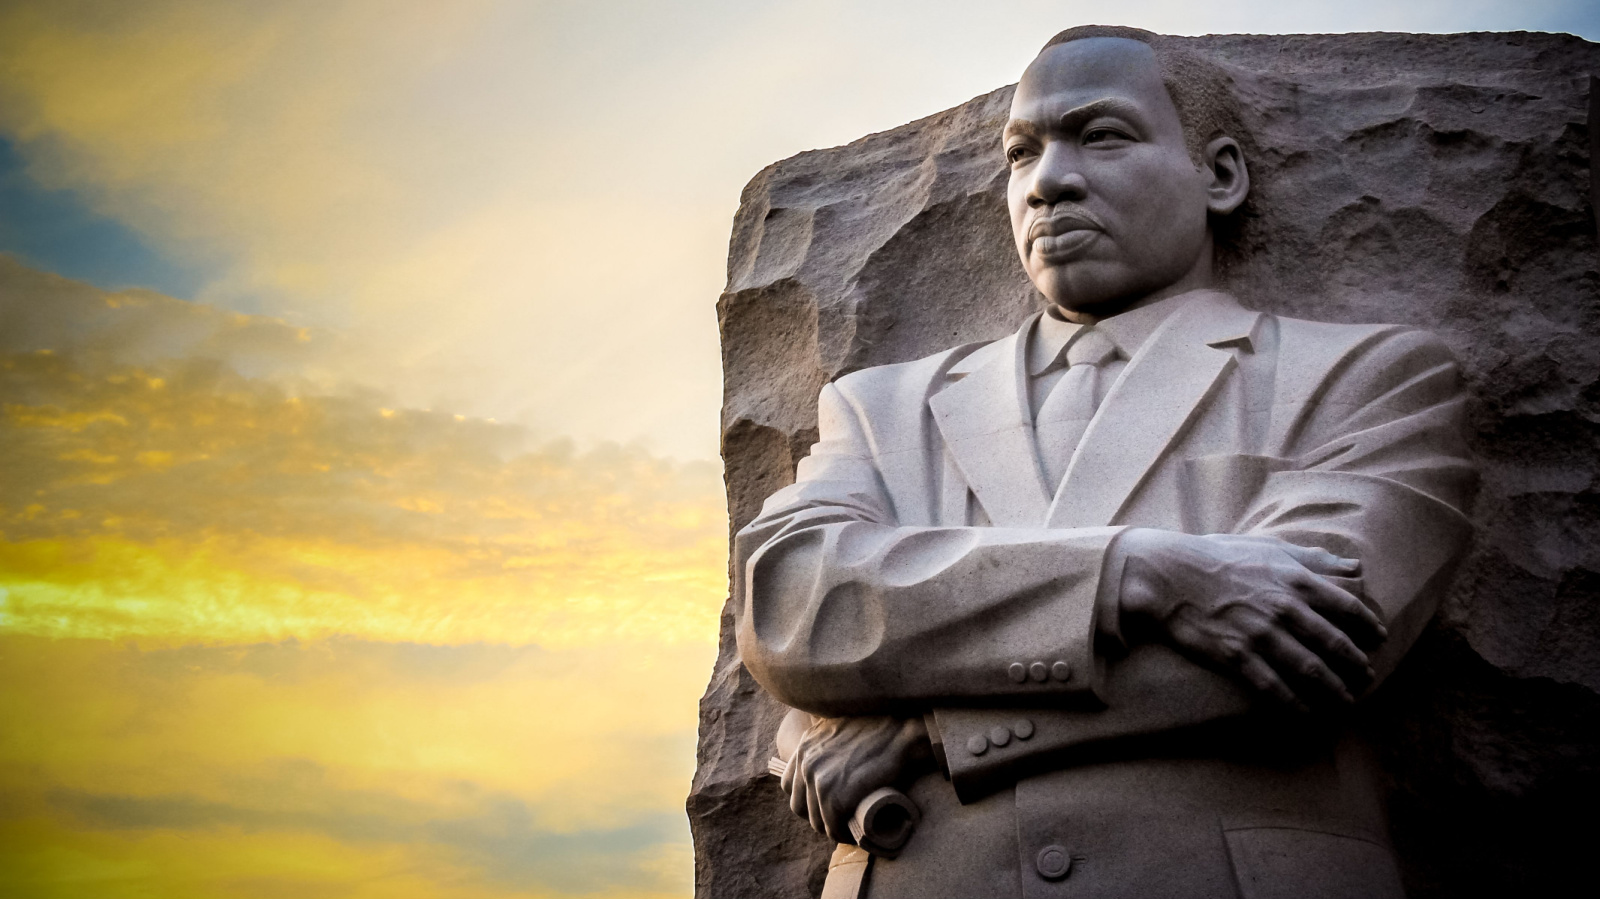 image credit: Atomazul/Shutterstock <p><span>In August 1963, Martin Luther King Jr. delivered a powerful speech that became a defining moment in the civil rights movement. Standing before a massive crowd at the Lincoln Memorial, he spoke of his vision for a future where people would be judged not by the color of their skin but by the content of their character. This speech remains a poignant reminder of the struggle for racial equality. An online commenter reflected, “King’s words still echo in our society, reminding us of the journey ahead.”</span></p>